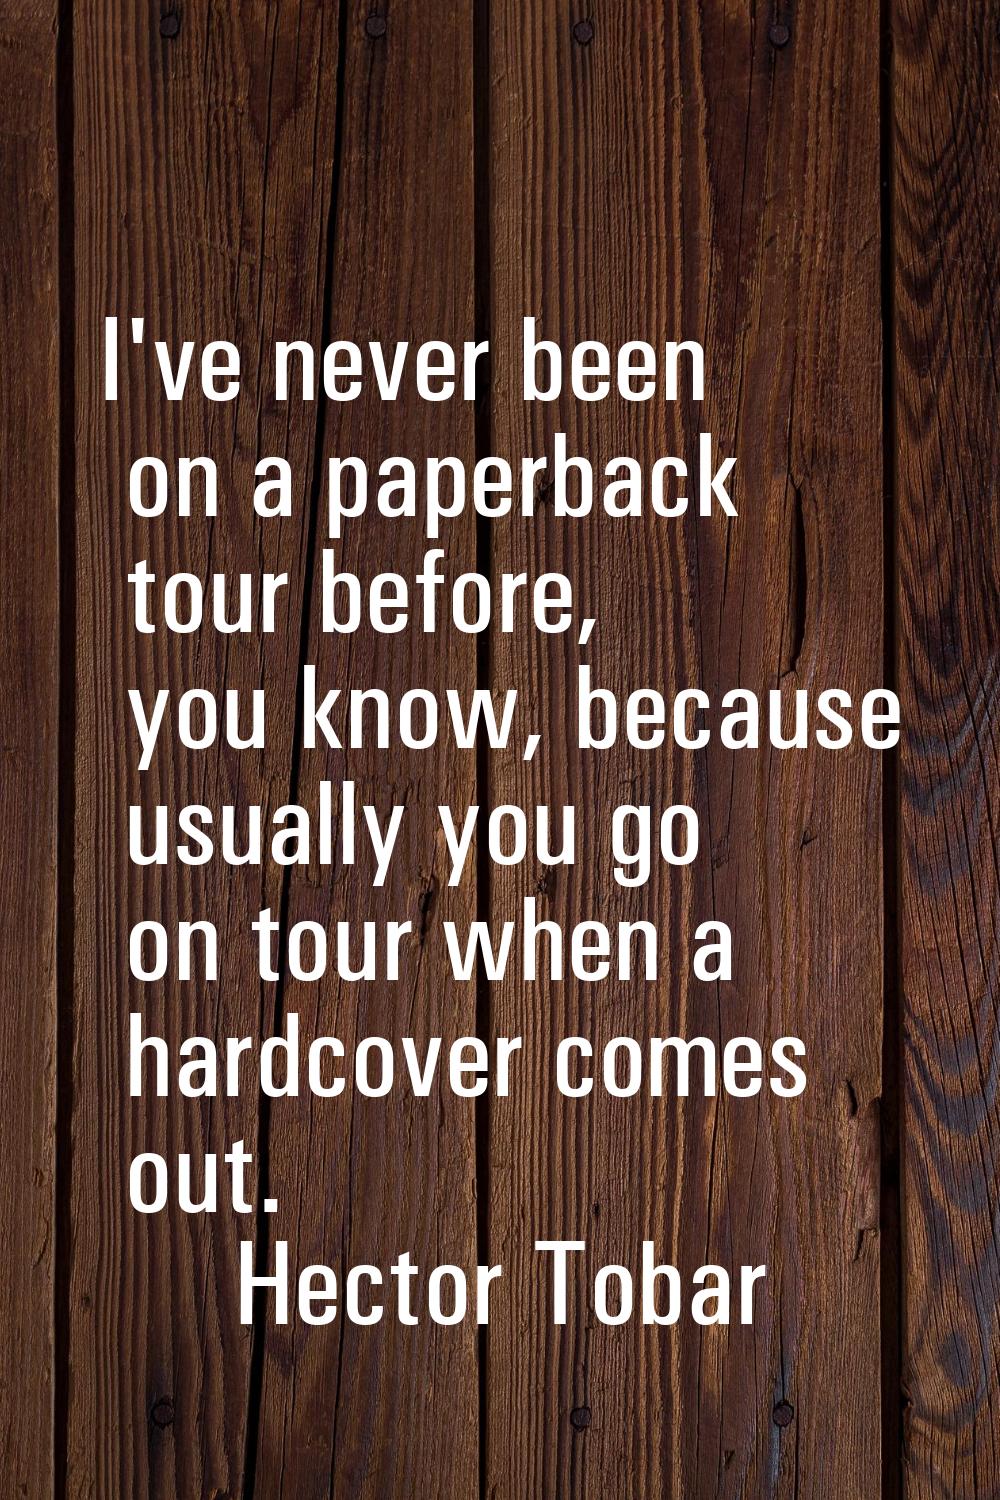 I've never been on a paperback tour before, you know, because usually you go on tour when a hardcov